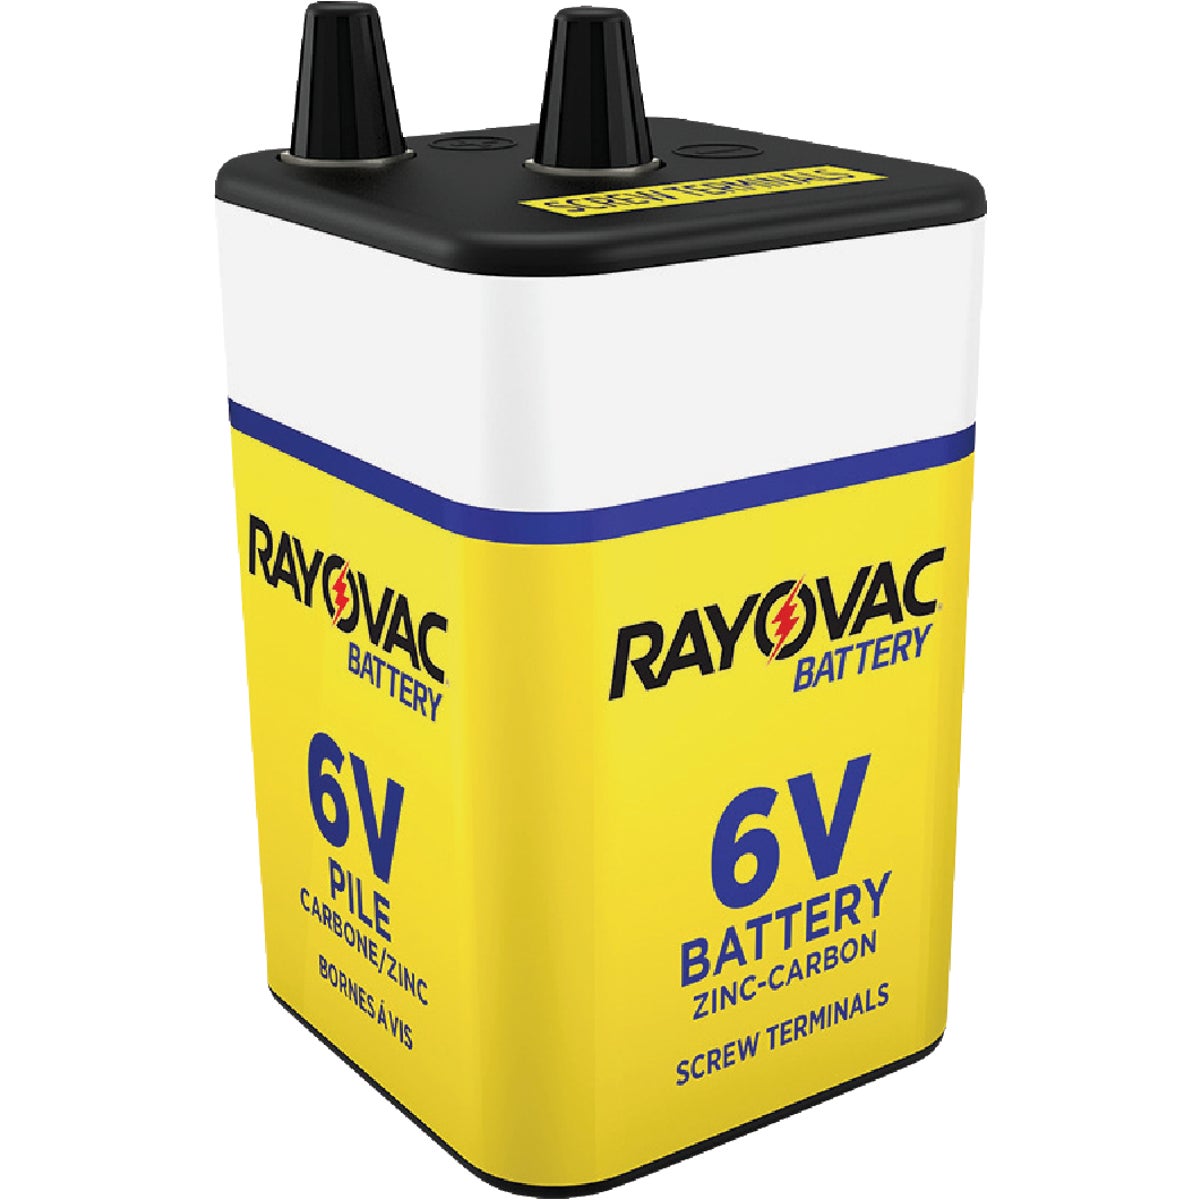 Item 801783, Rayovac Heavy Duty Lantern Battery is ideal for powering high-drain devices